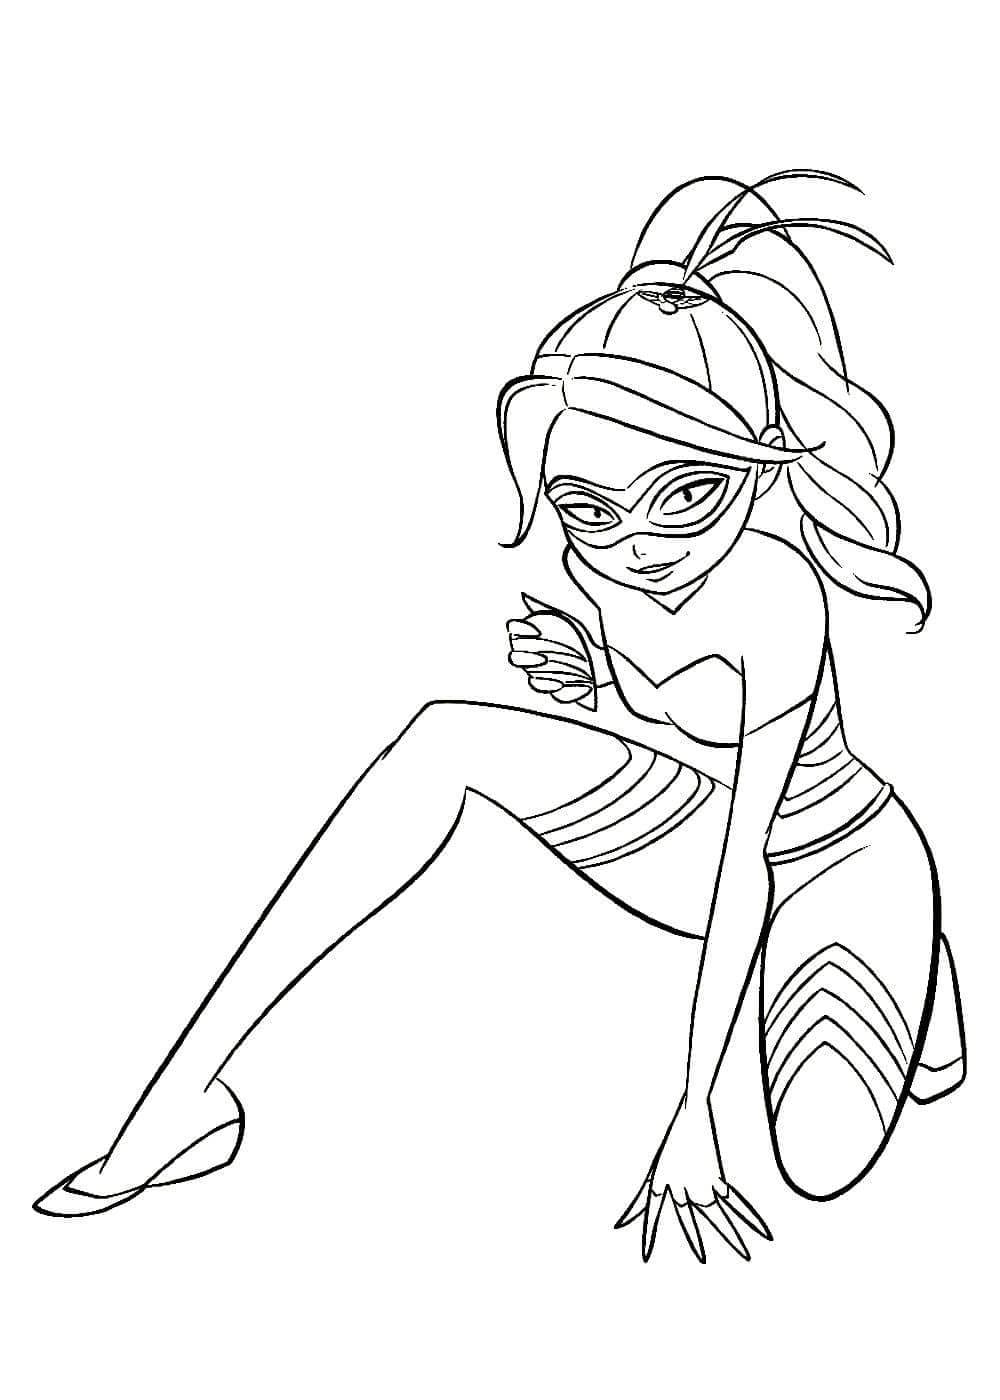 Download 246+ Ladybug And Cat Noir S Coloring Pages PNG PDF File